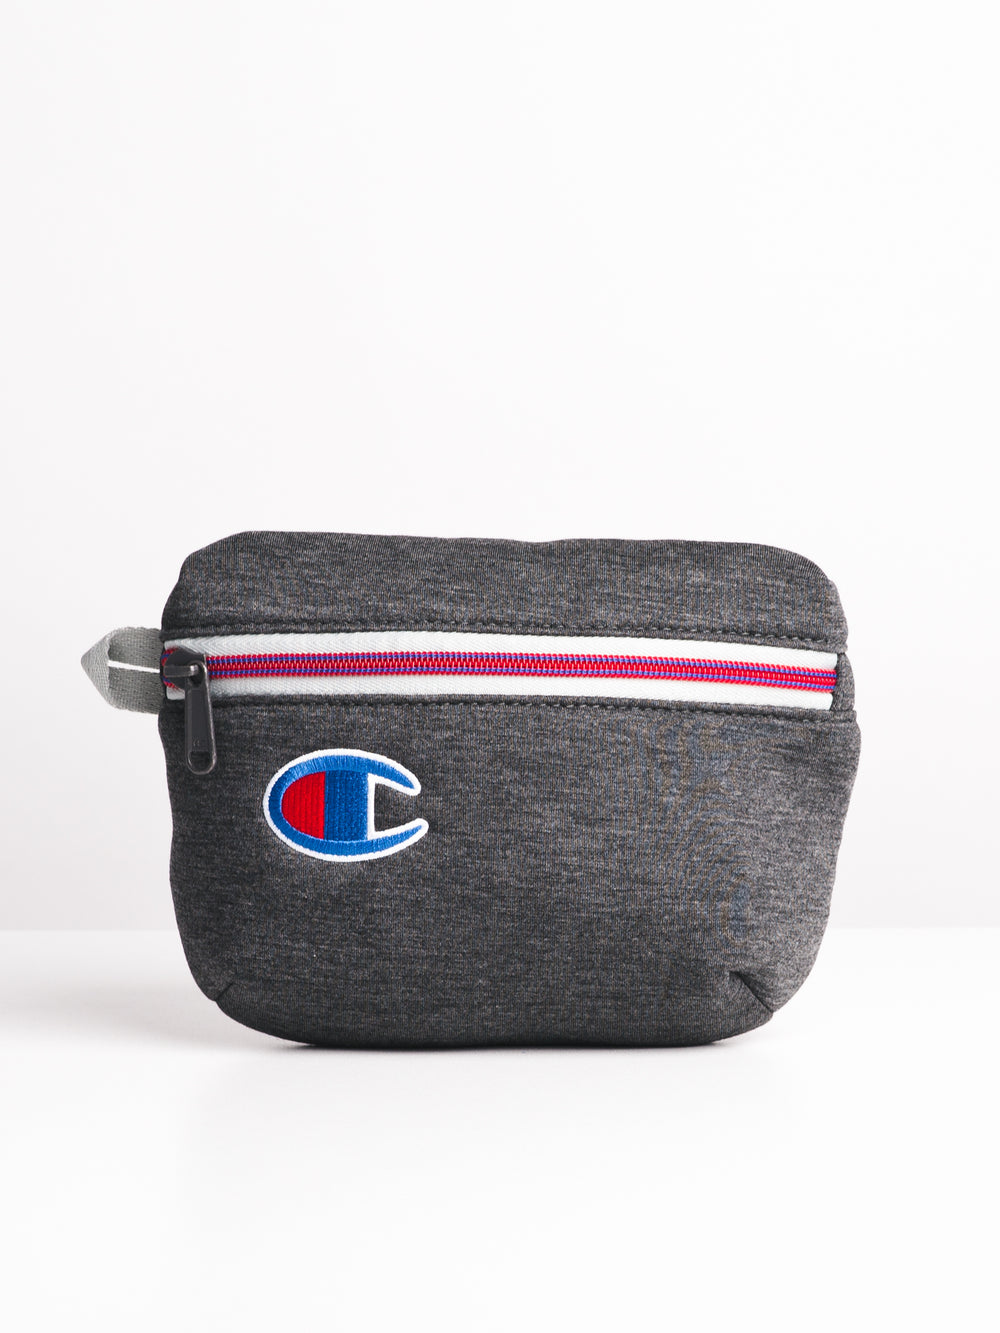 ATTRIBUTE WAISTBAG FANNY PACK - DK GREY - CLEARANCE